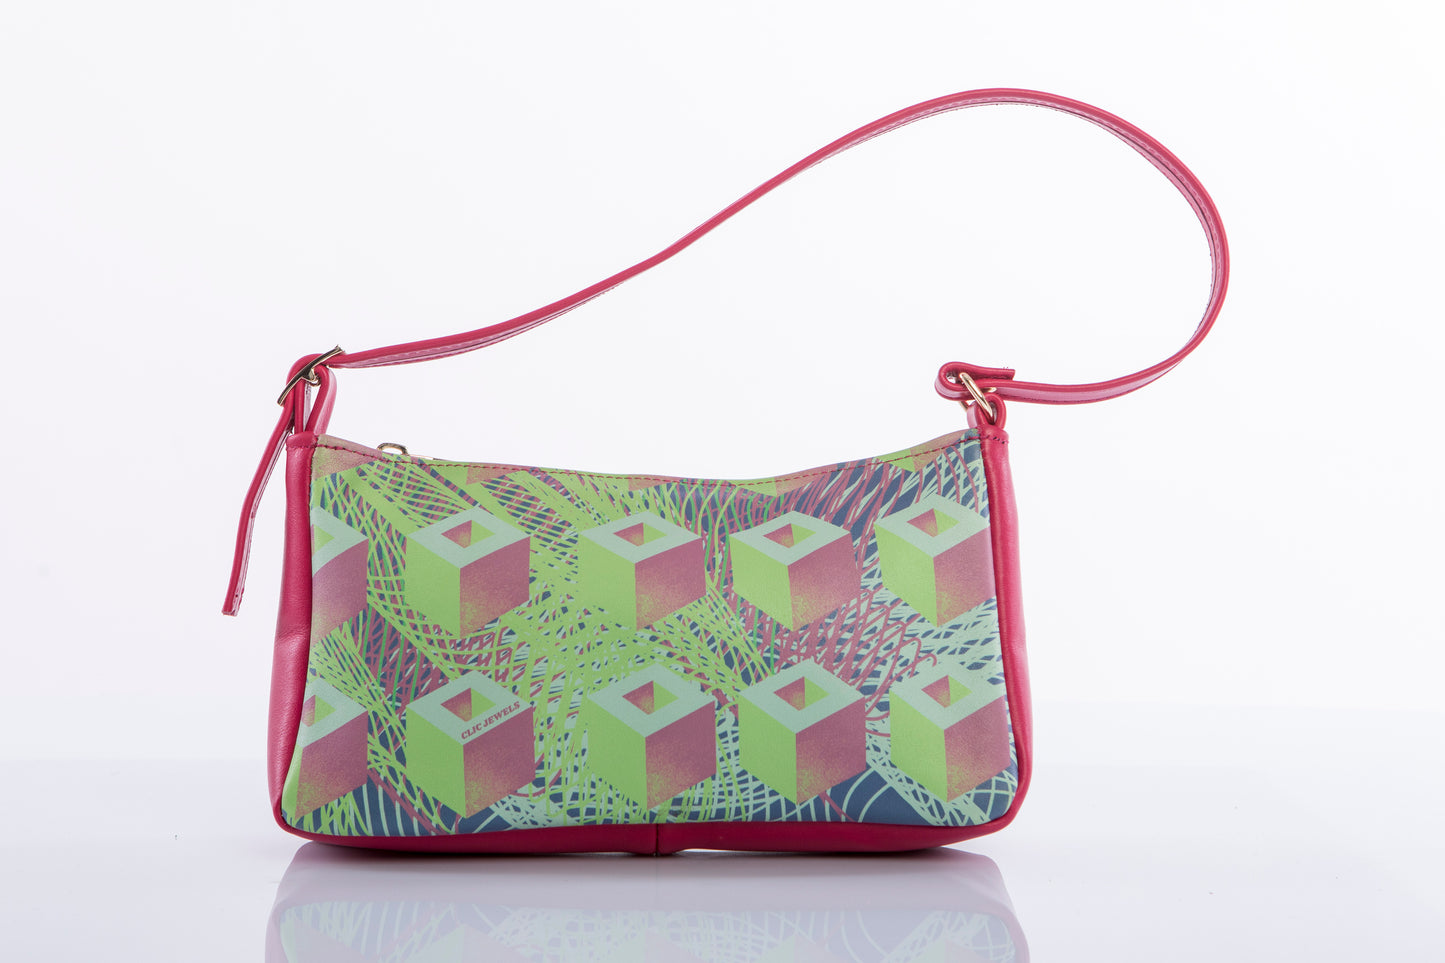 Baguette with print on genuine leather